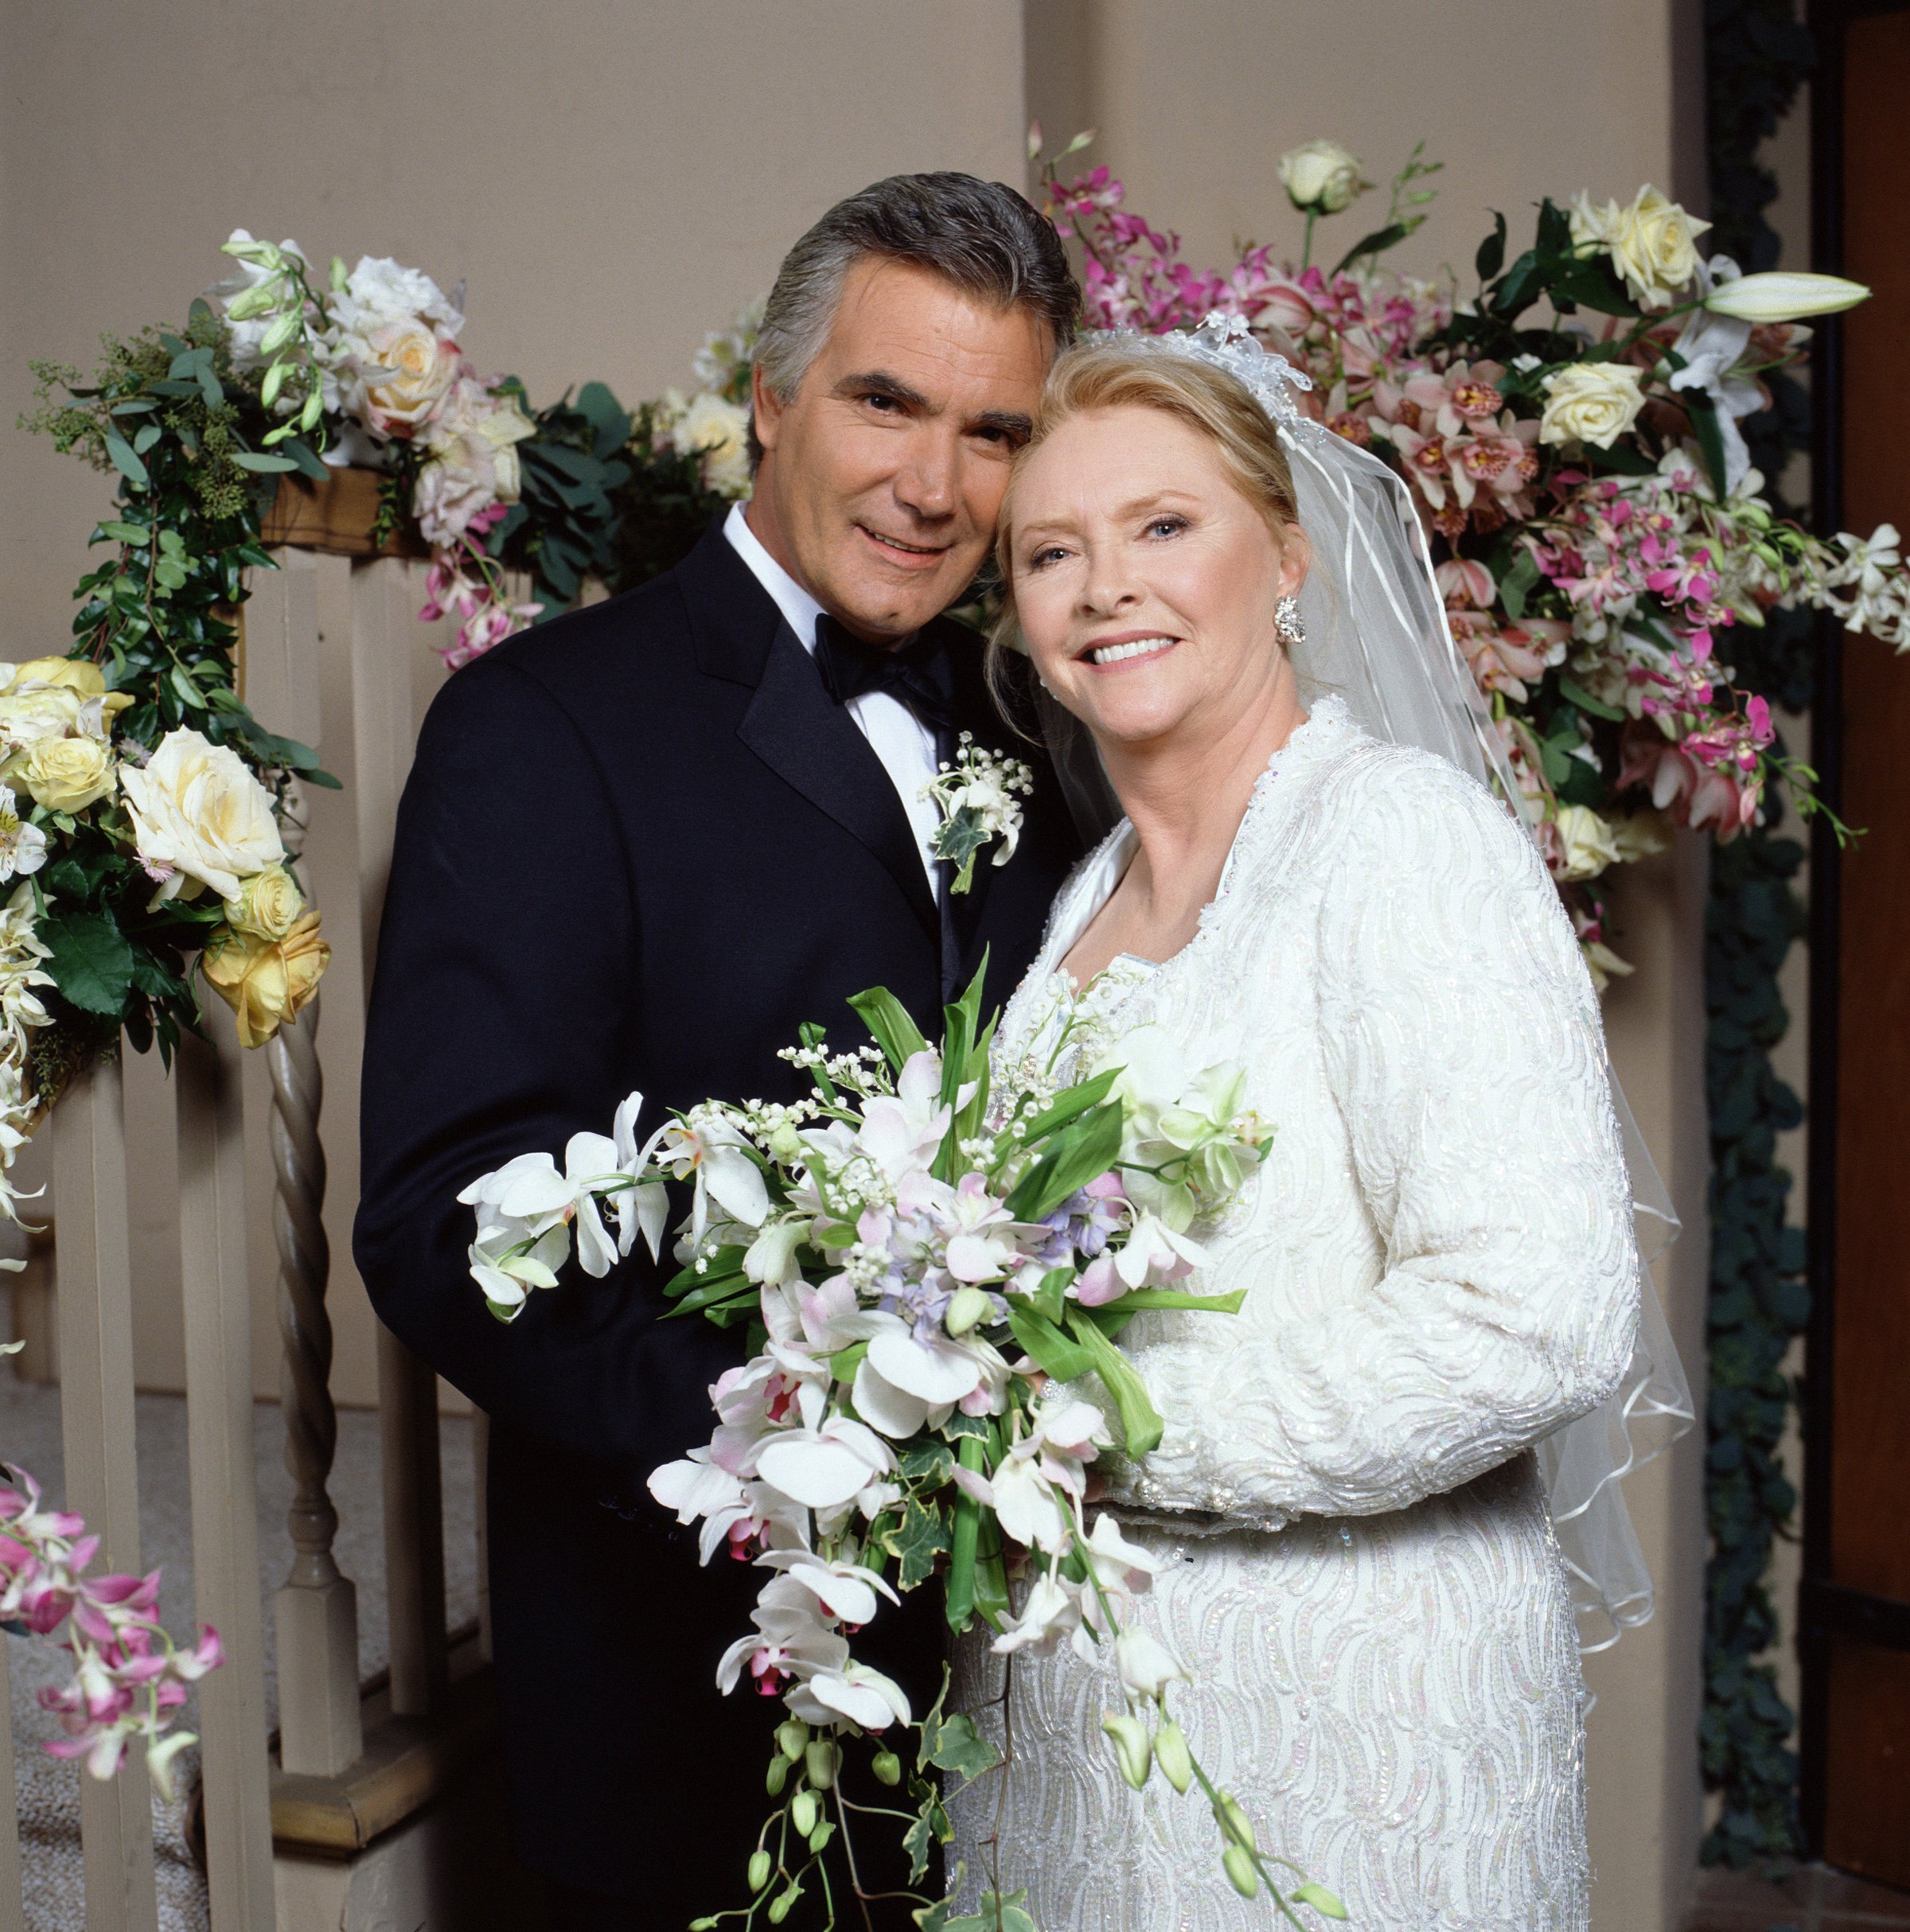 'The Bold and the Beautiful' actor John McCook in a tuxedo and Susan Flannery in a wedding dress pose for a promotional photo for the CBS soap opera.